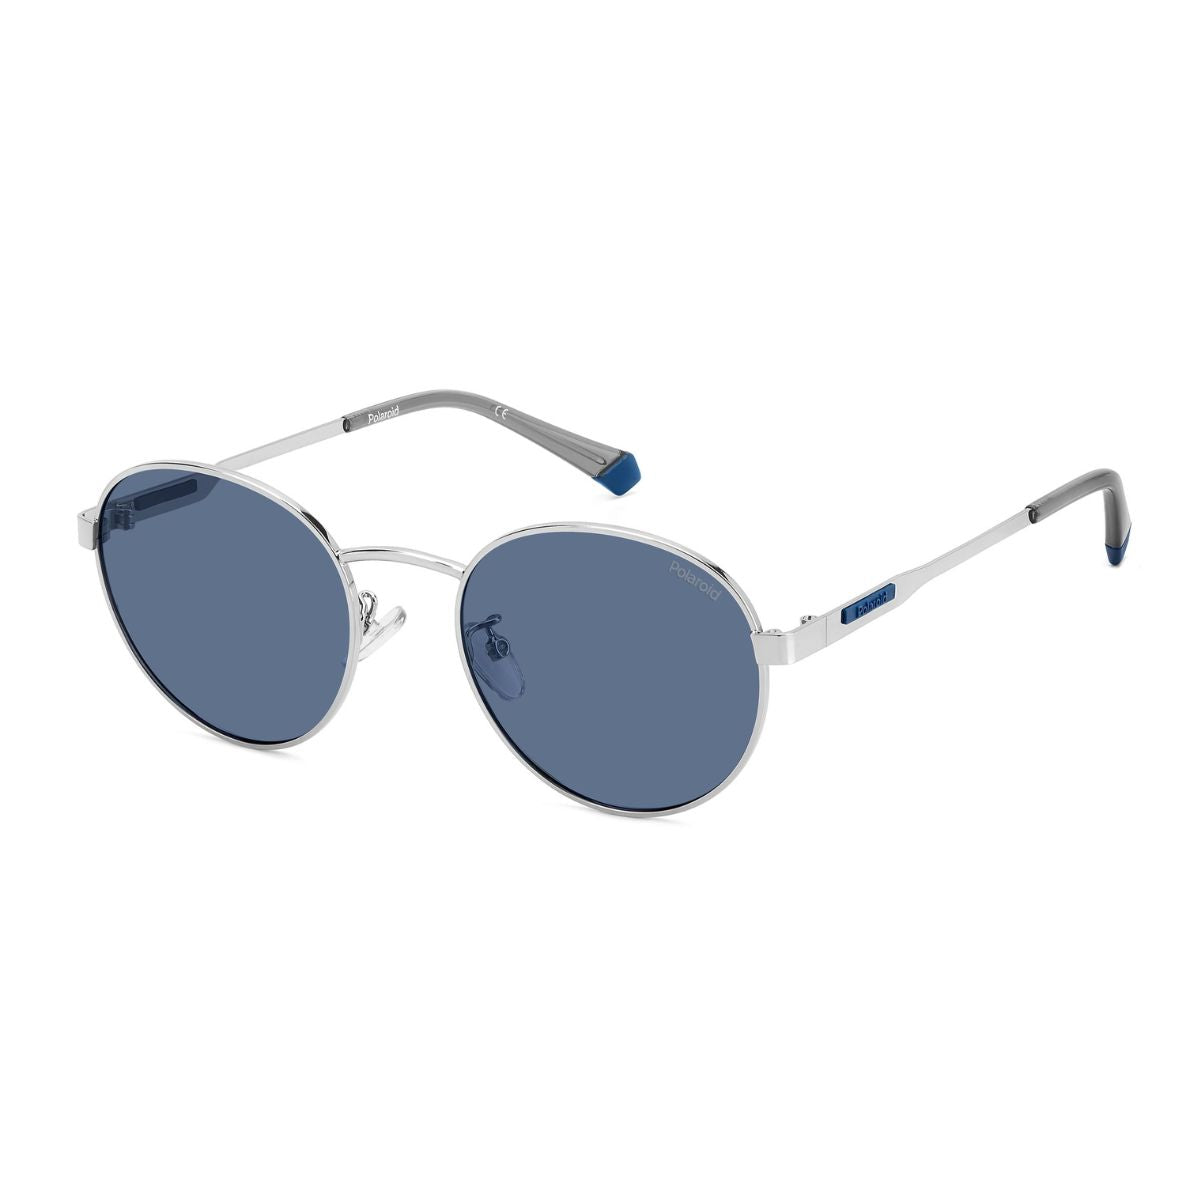 "Polaroid 2114/G/S/X 010C3 Oval Shape Polarized Sunglass For Men and Women At Optorium"